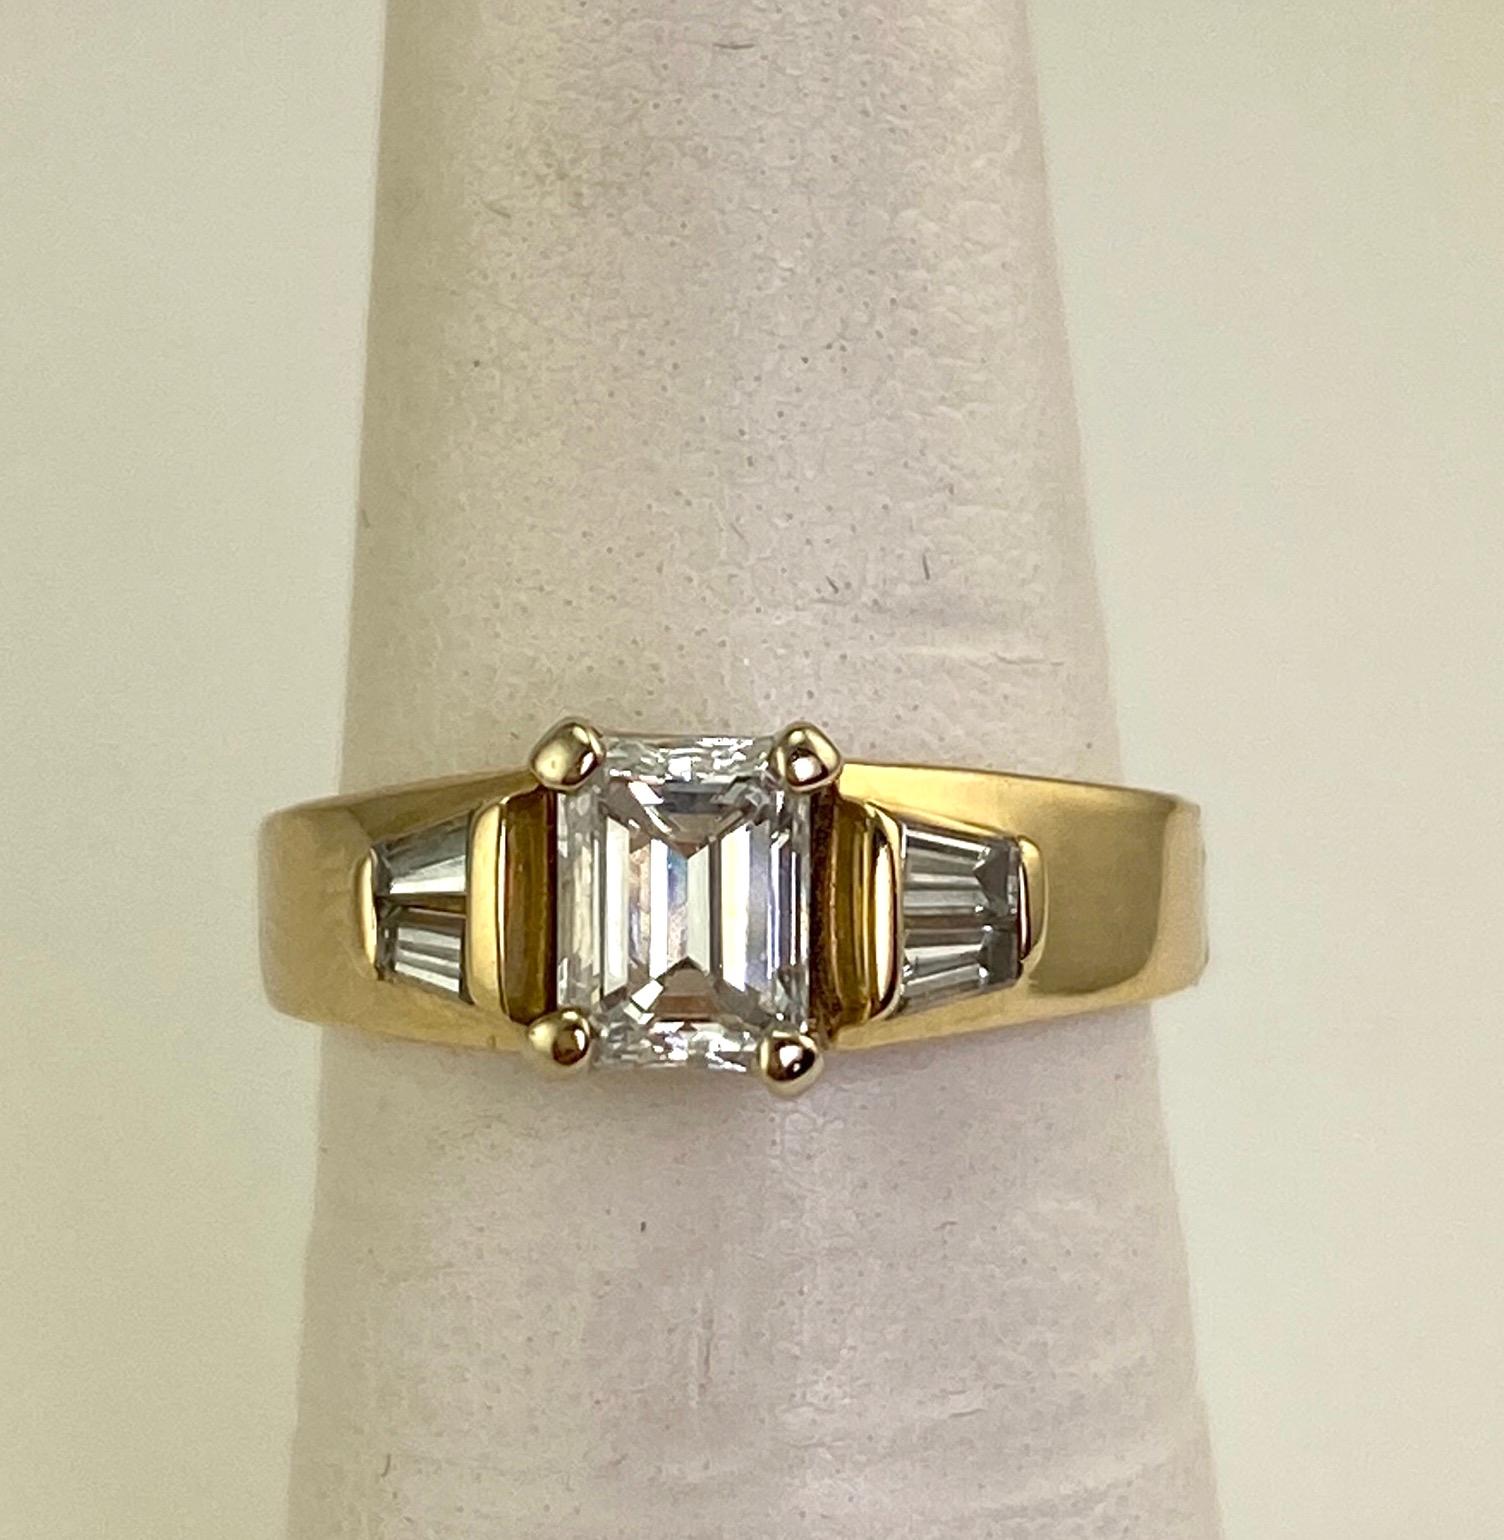 Natural emerald cut diamond weighing approximately .74 carat. The clarity is VVS2. The color is G-H. The conservative grading was performed by a GIA Graduate Gemologist. The baguette side diamonds weigh approximately .26 carat total. The 14 karat